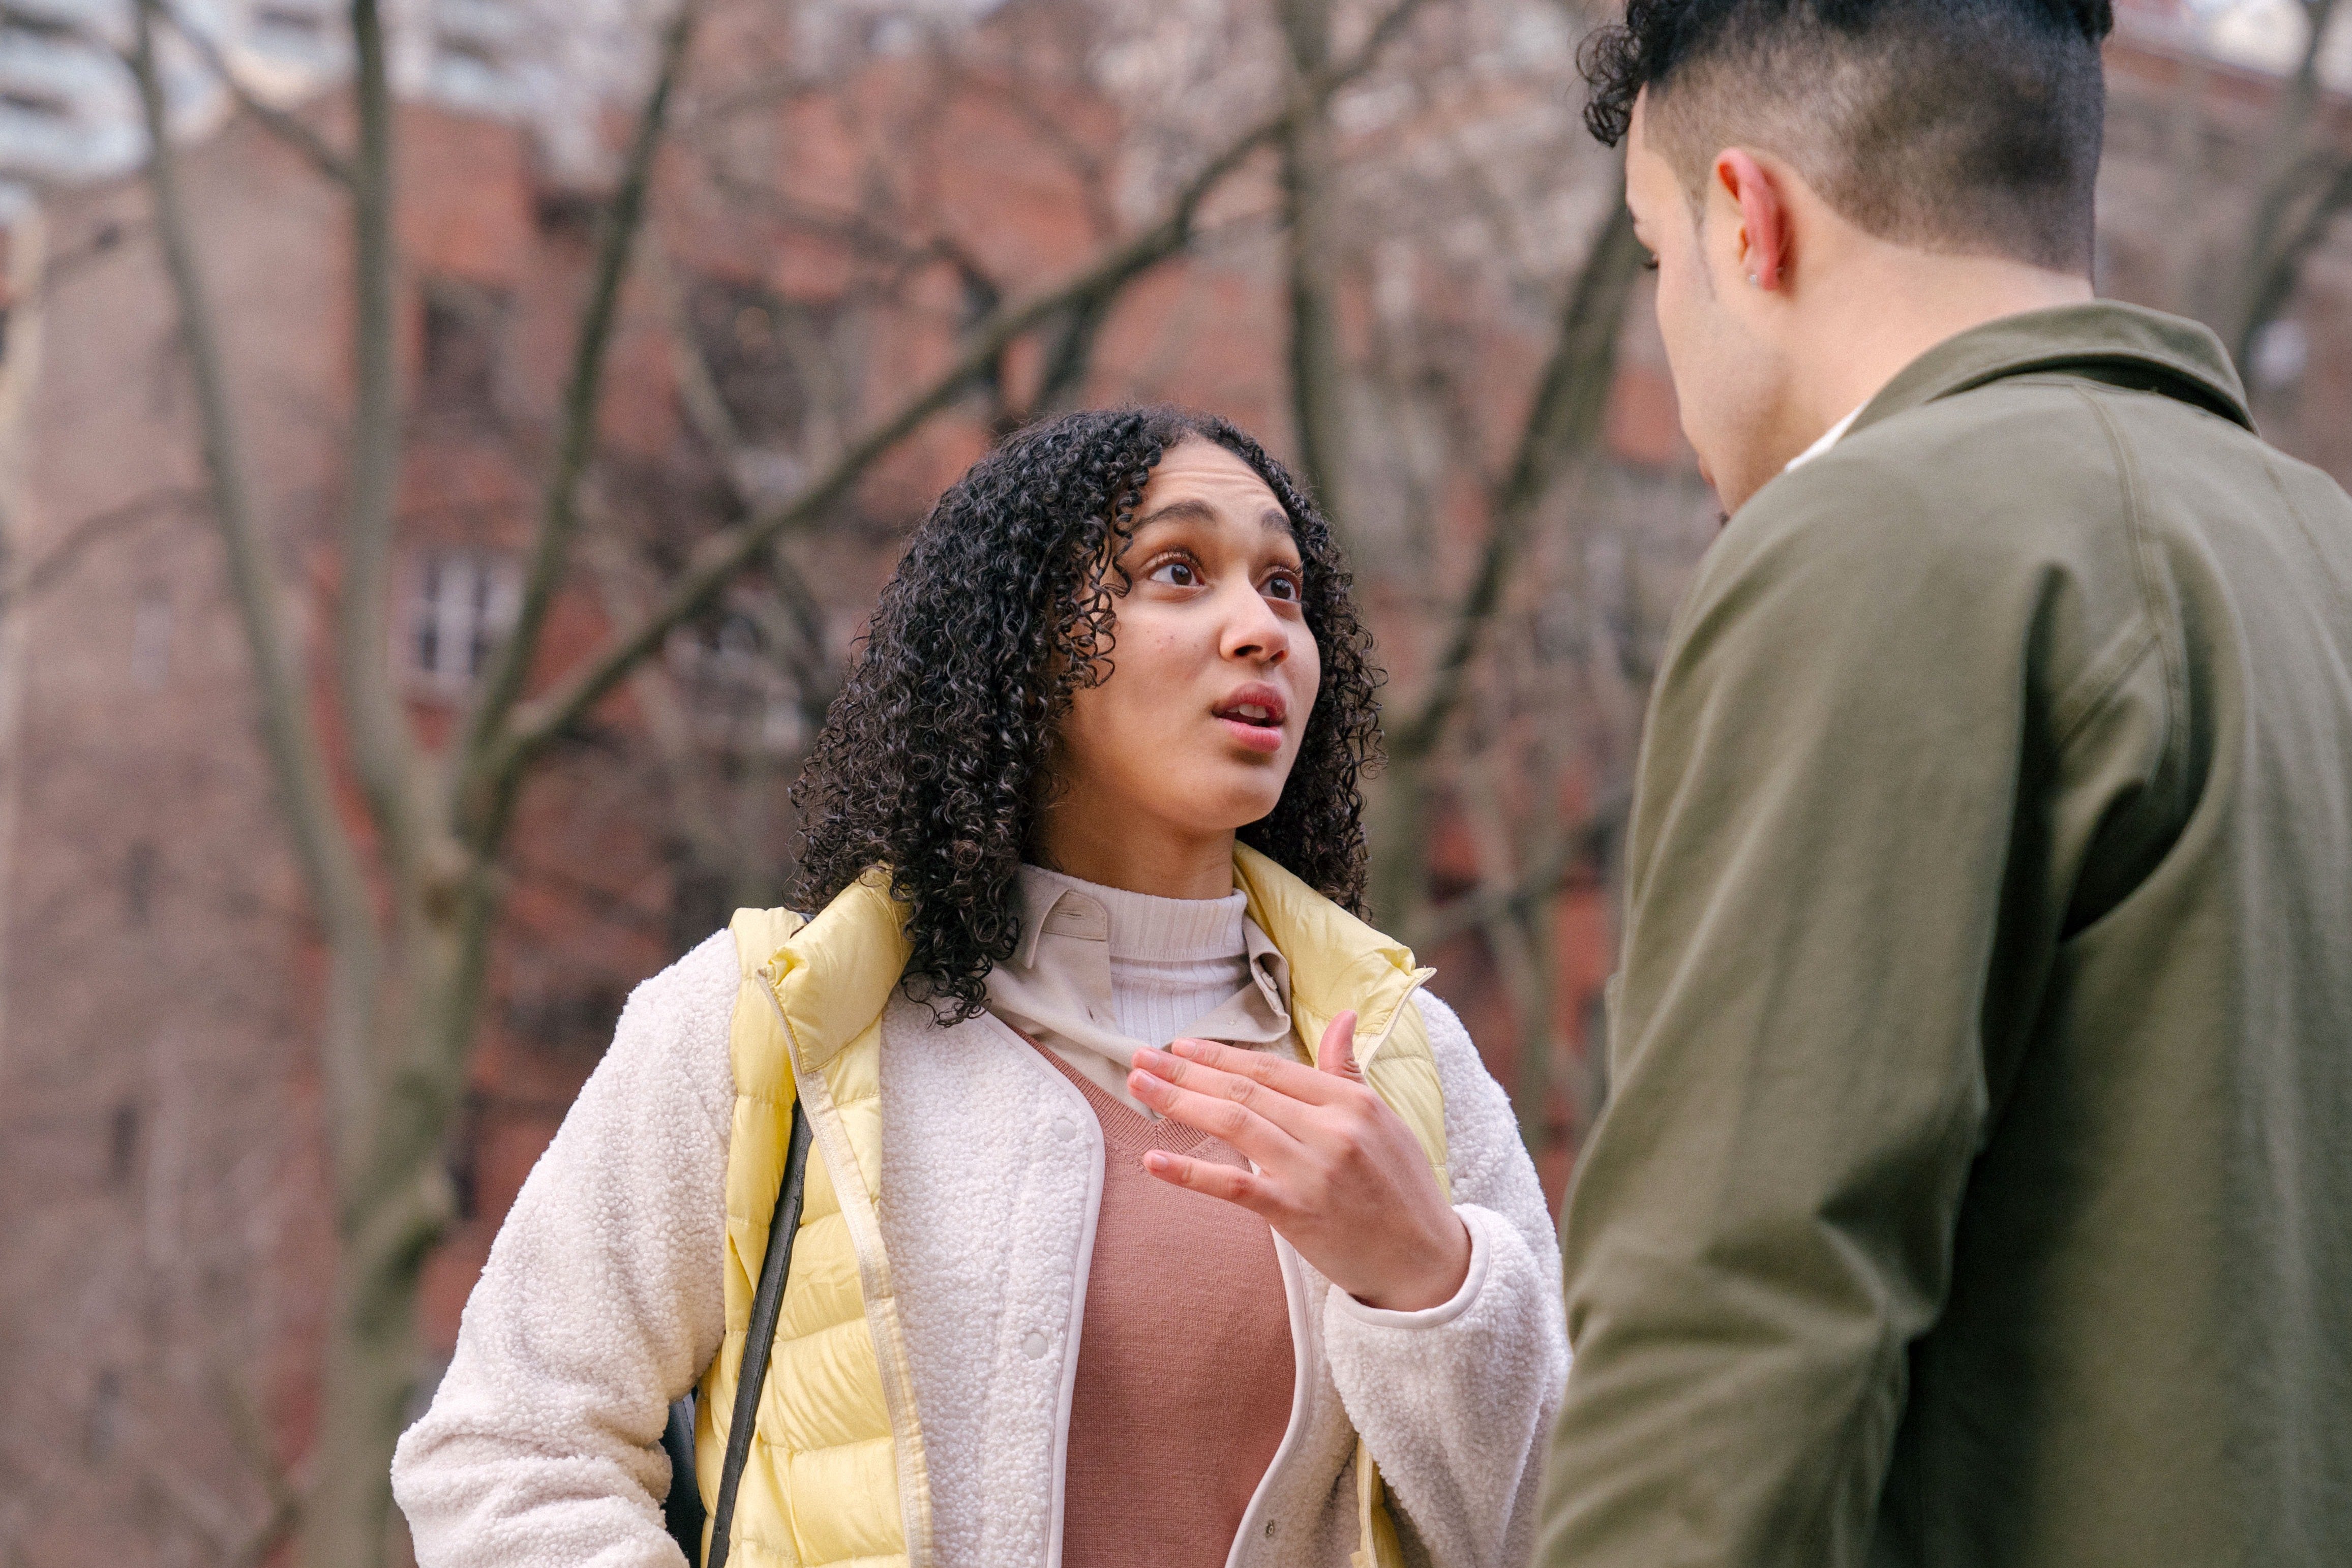 The roommate's girlfriend confronts the guy | Photo: Pexels